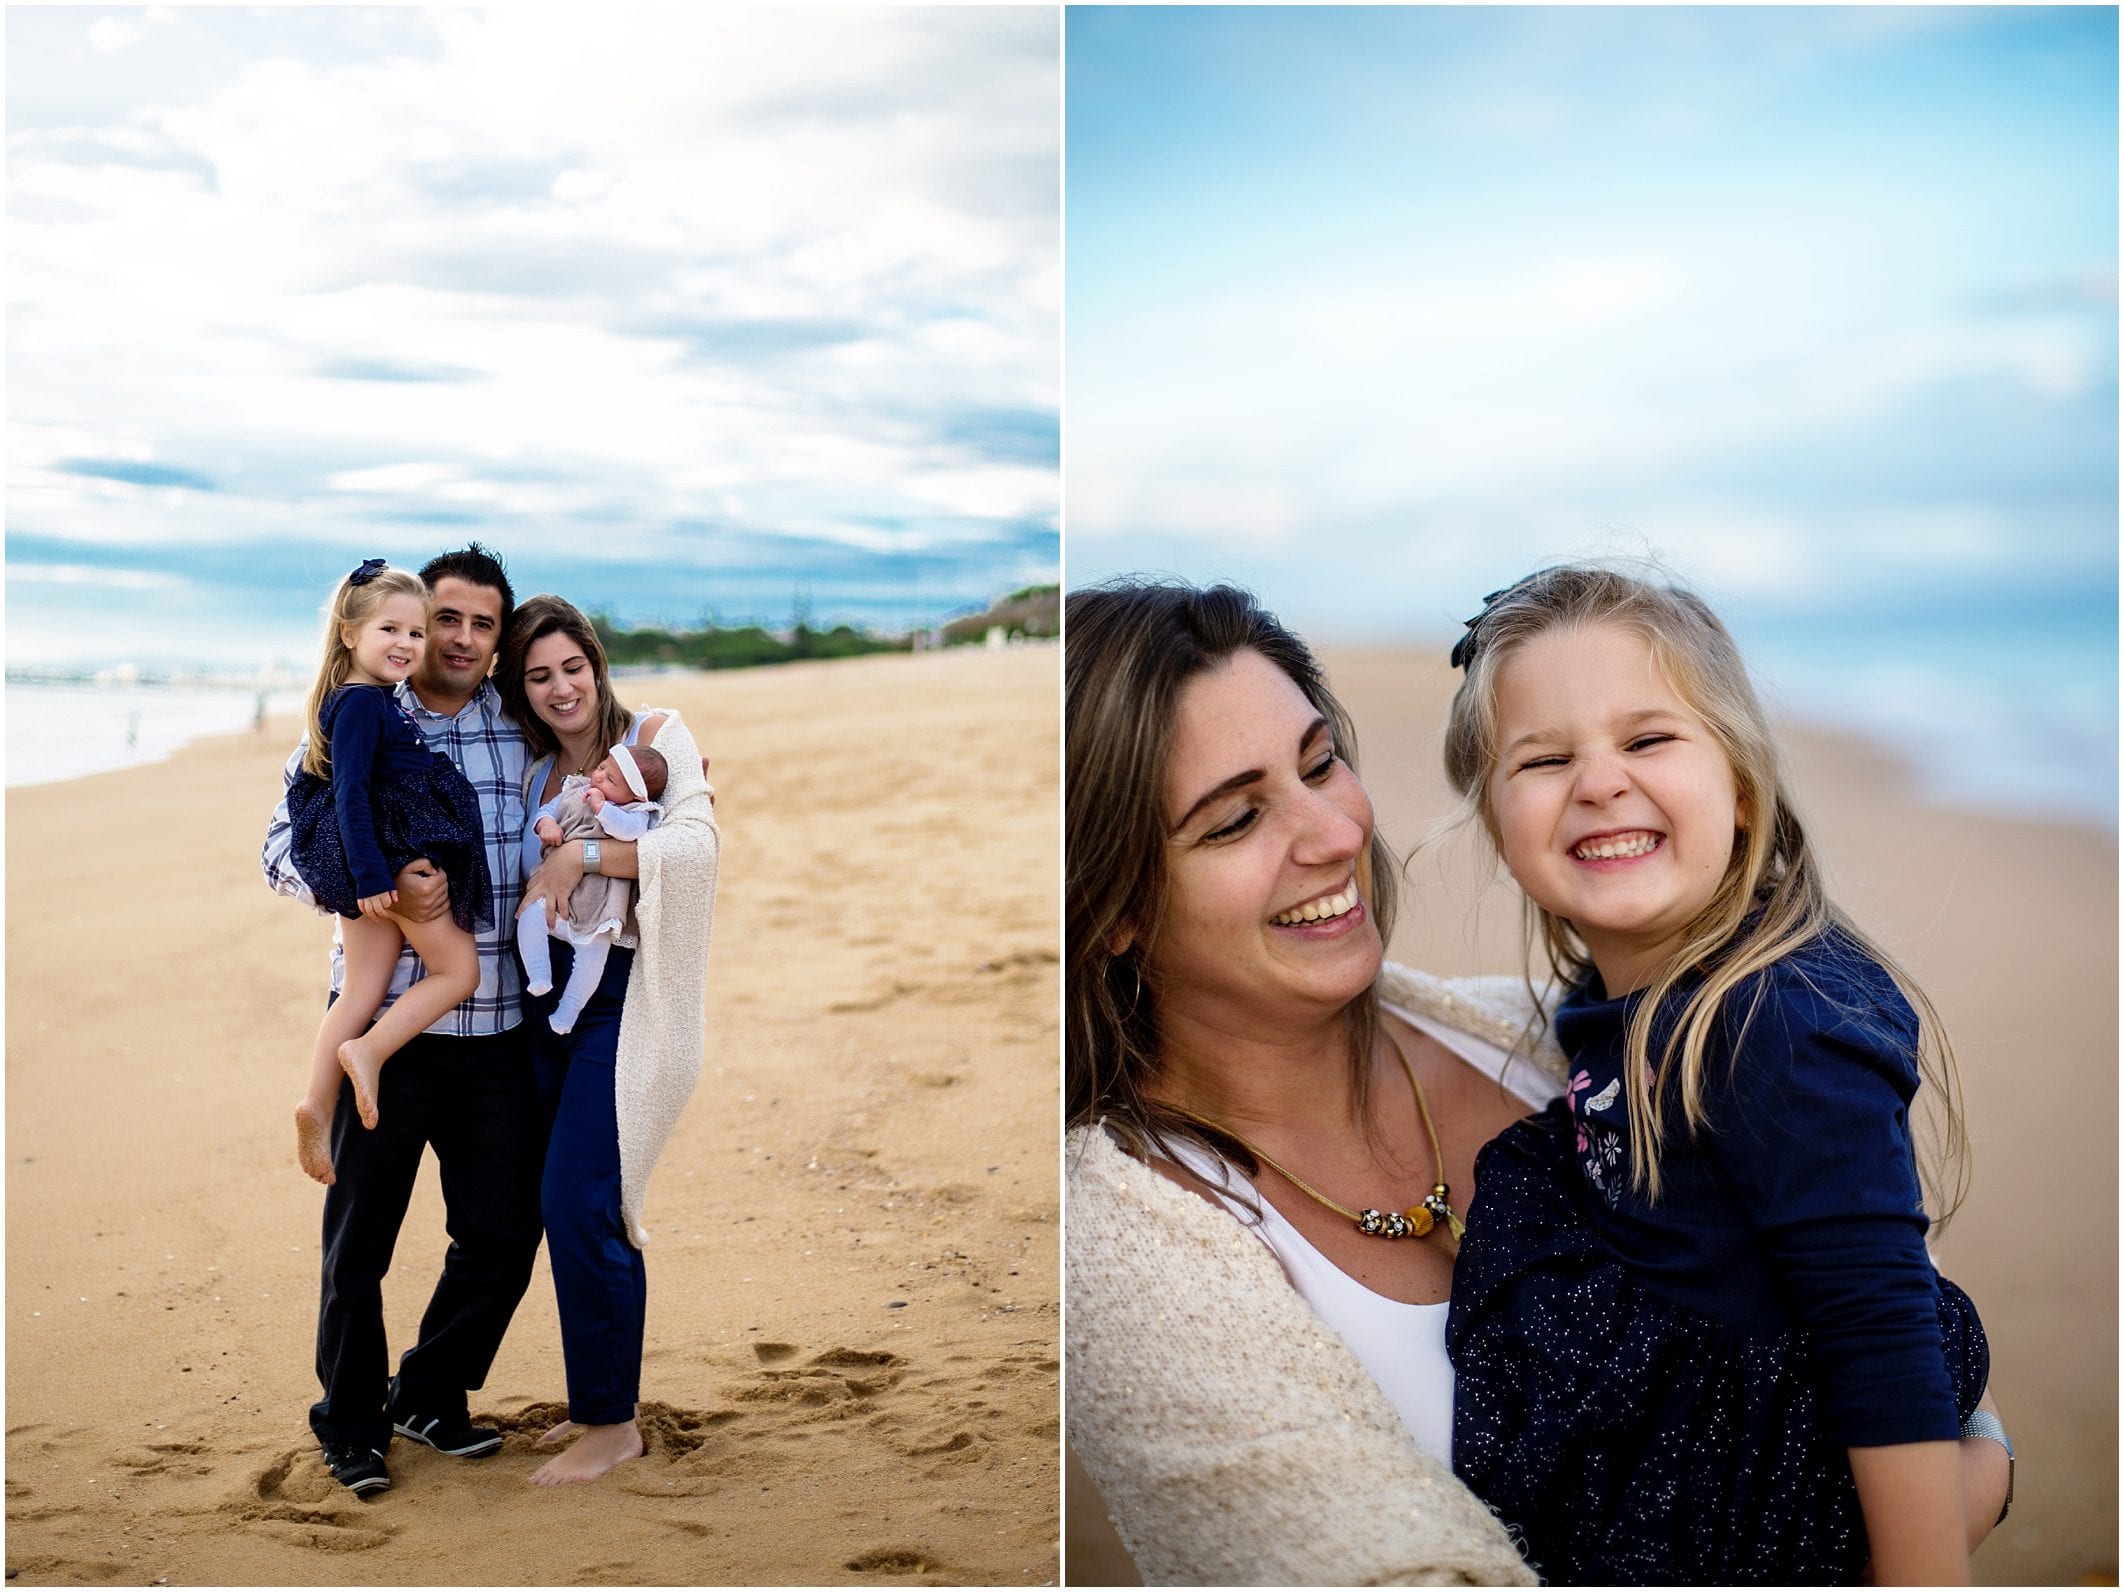 Helena Woods shares her recent family beach session in Portugal at Quinta do Lago, Algarve. Destination Family and Children's photographer travels worldwide for lifestyle emotive family portraiture.